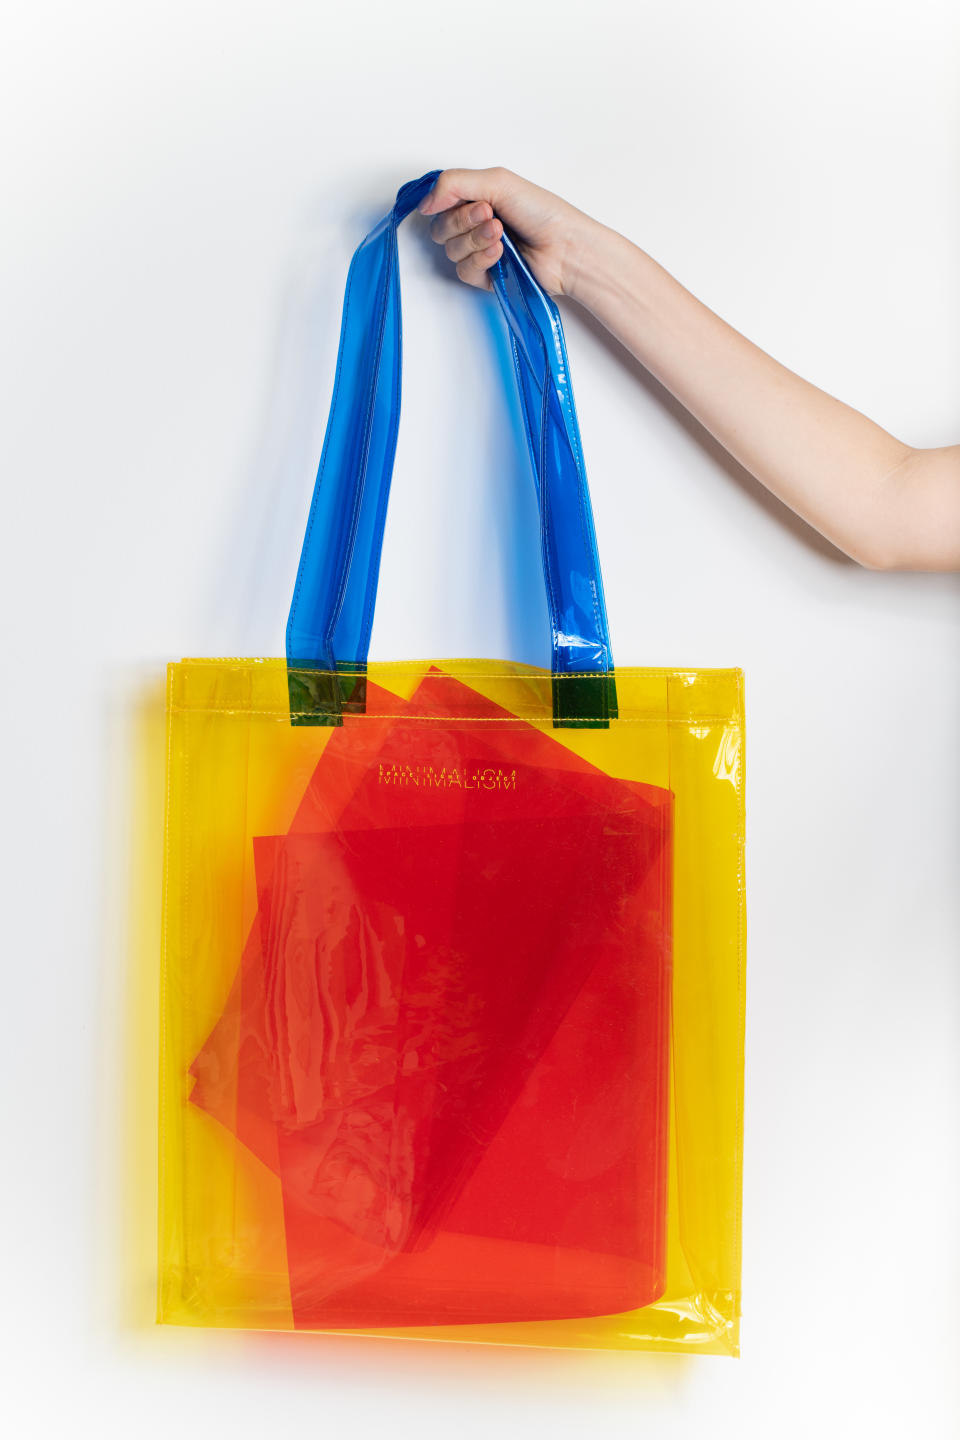 Tote bags in neon-coloured PVC (SGD 29.90). (Photo: Gallery & Co.)